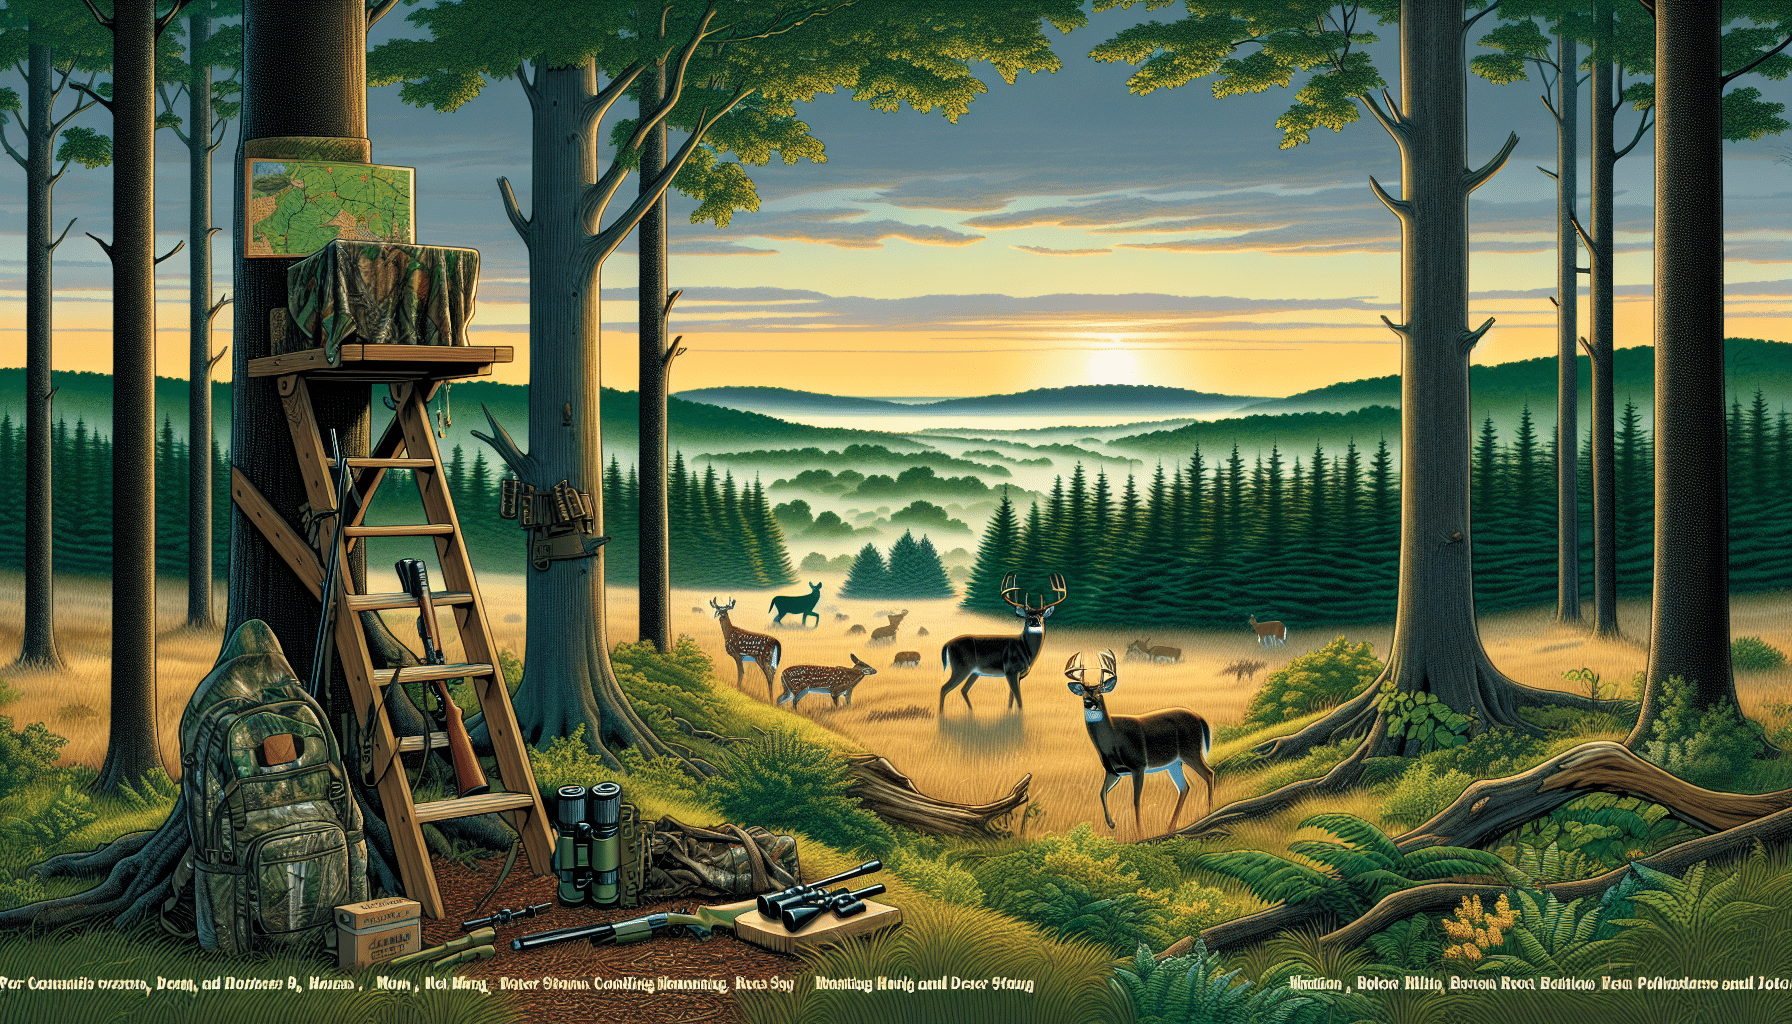 A scenic landscape signifies Maryland's hunting locations without including any people. Feature a dense forest with both coniferous and deciduous trees noted for deer hunting. Early dawn or dusk lighting would hint at prime hunting times. Scatter signs of deer presence, such as footprints, nibbled foliage, or small herds grazing in the distance. Include hunting equipment like a tree stand, camouflage tarp, and a pair of binoculars laid against a tree, subtly signifying the 'how to hunt' aspect of the article. No text, brand names or logos should be visible in the image.